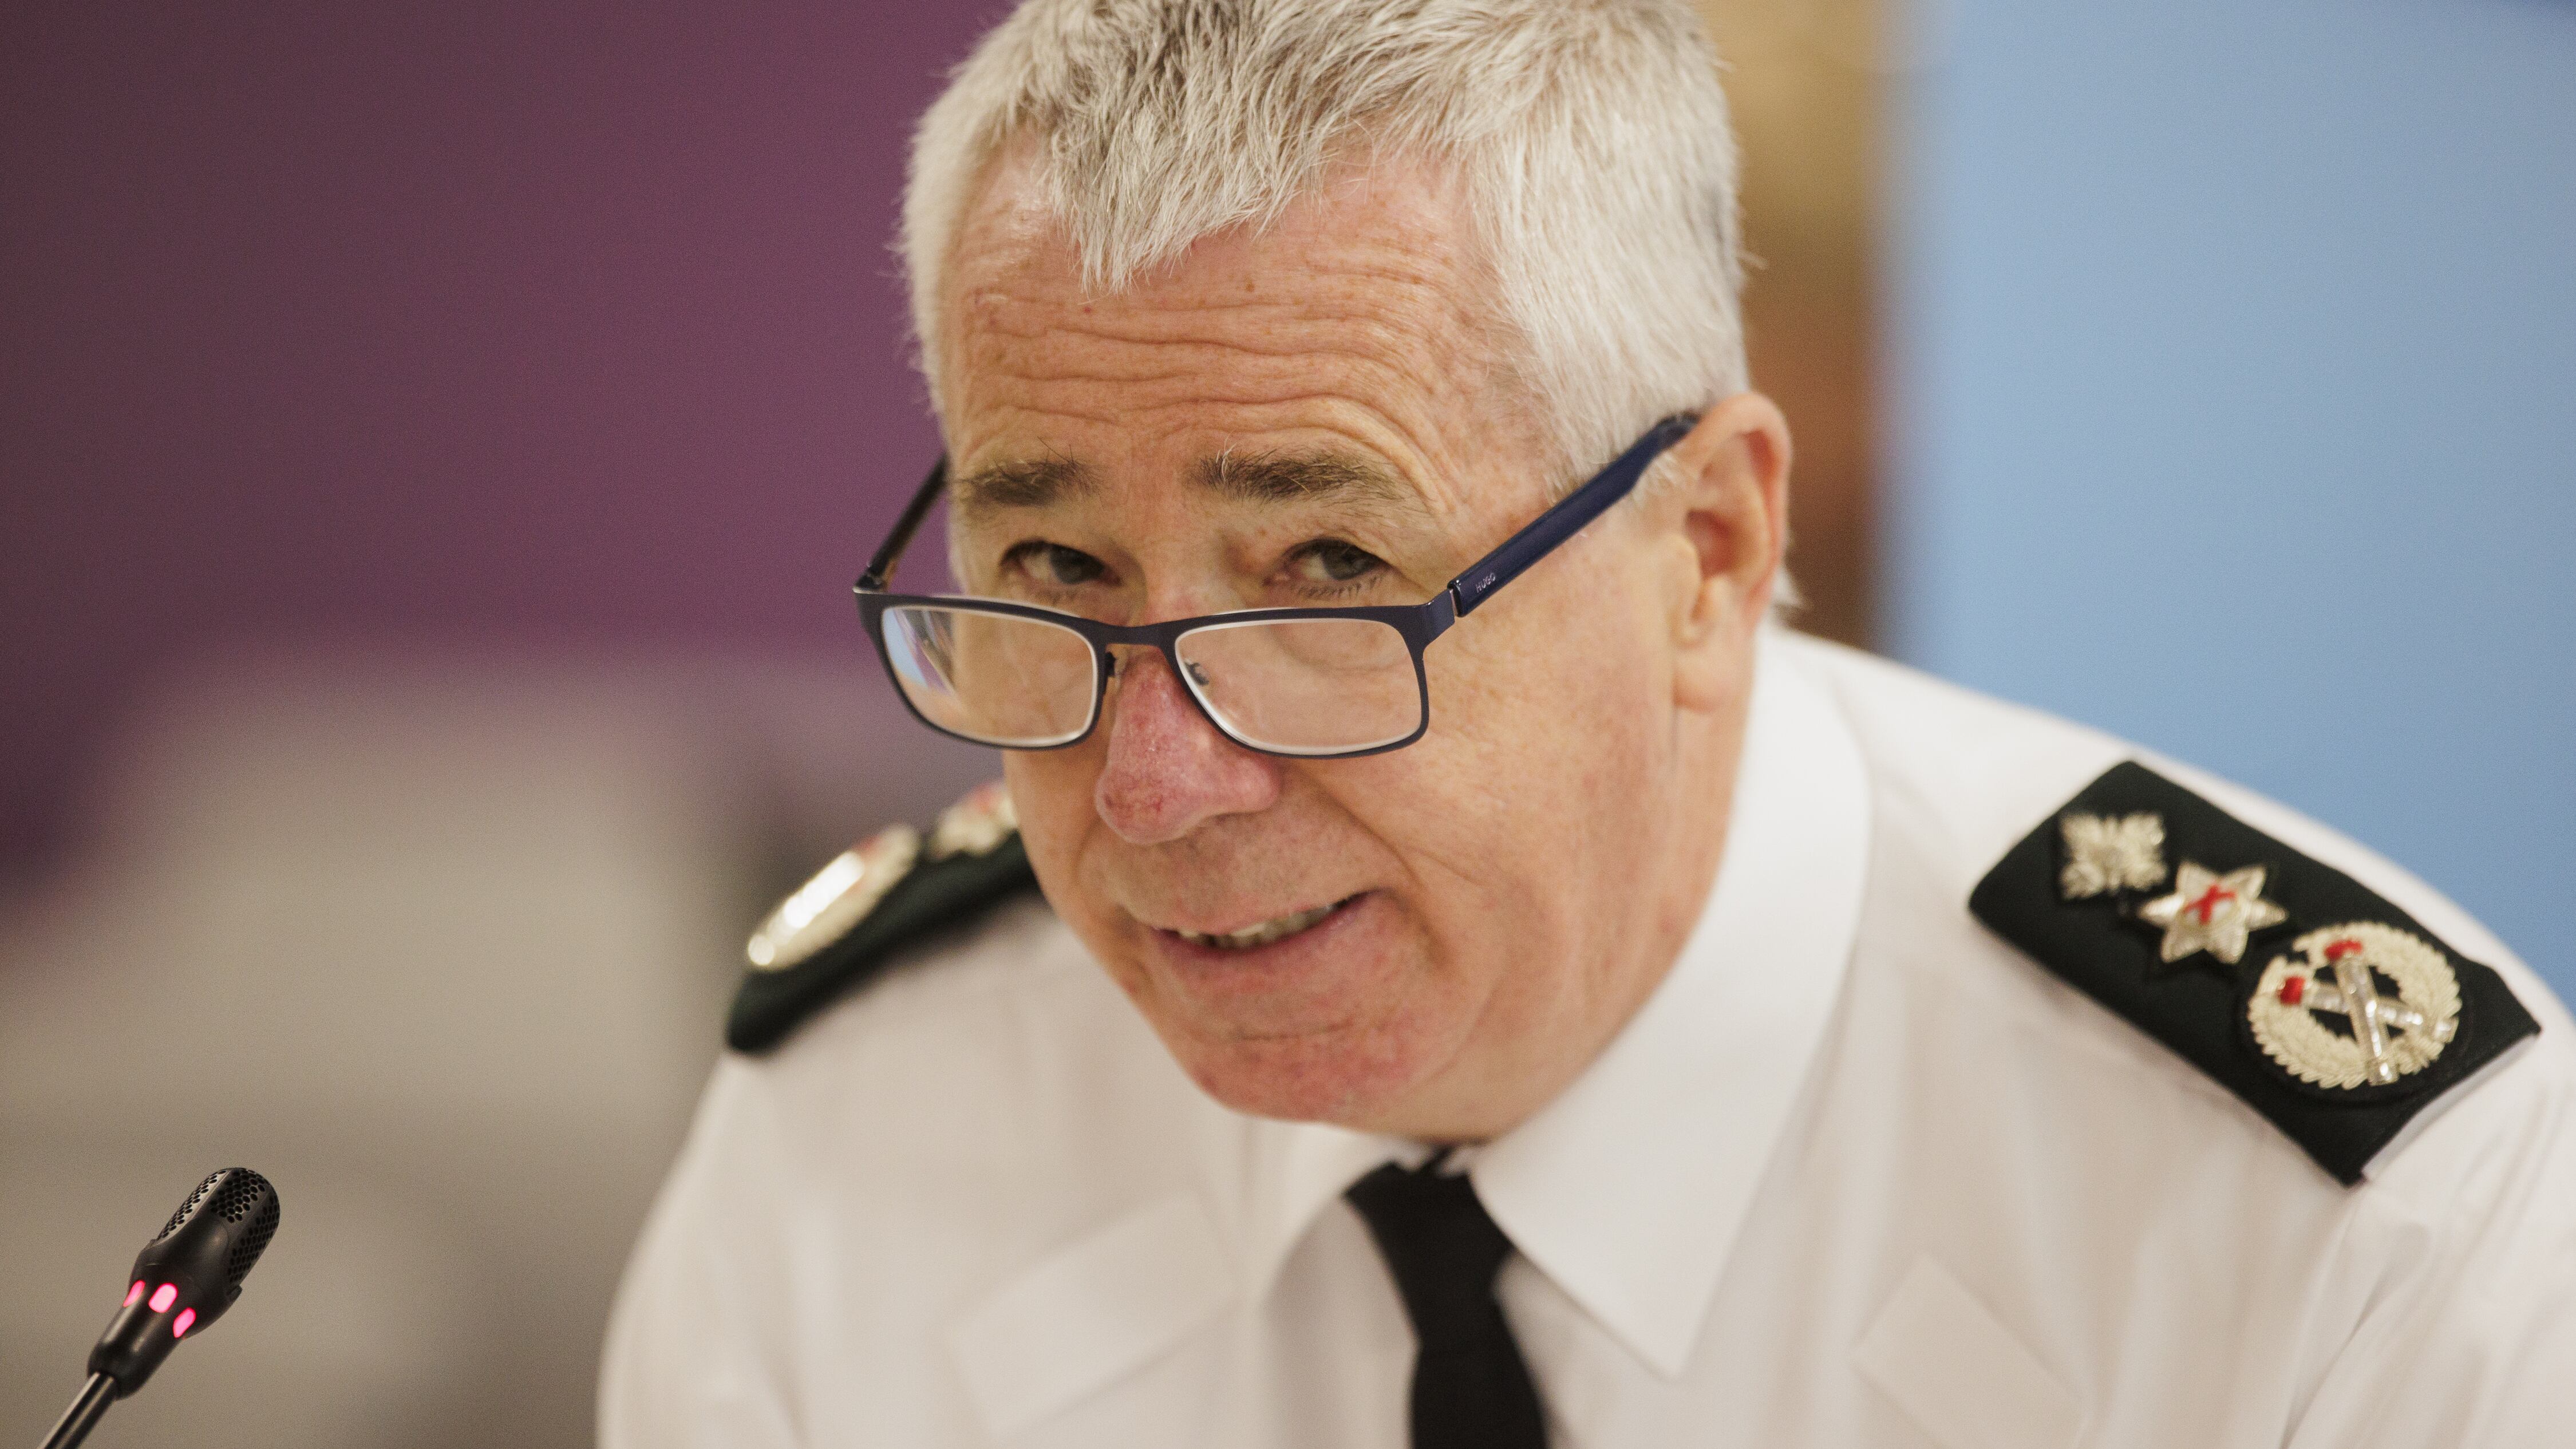 PSNI Chief Constable Jon Boutcher said he would meet with his oversight body